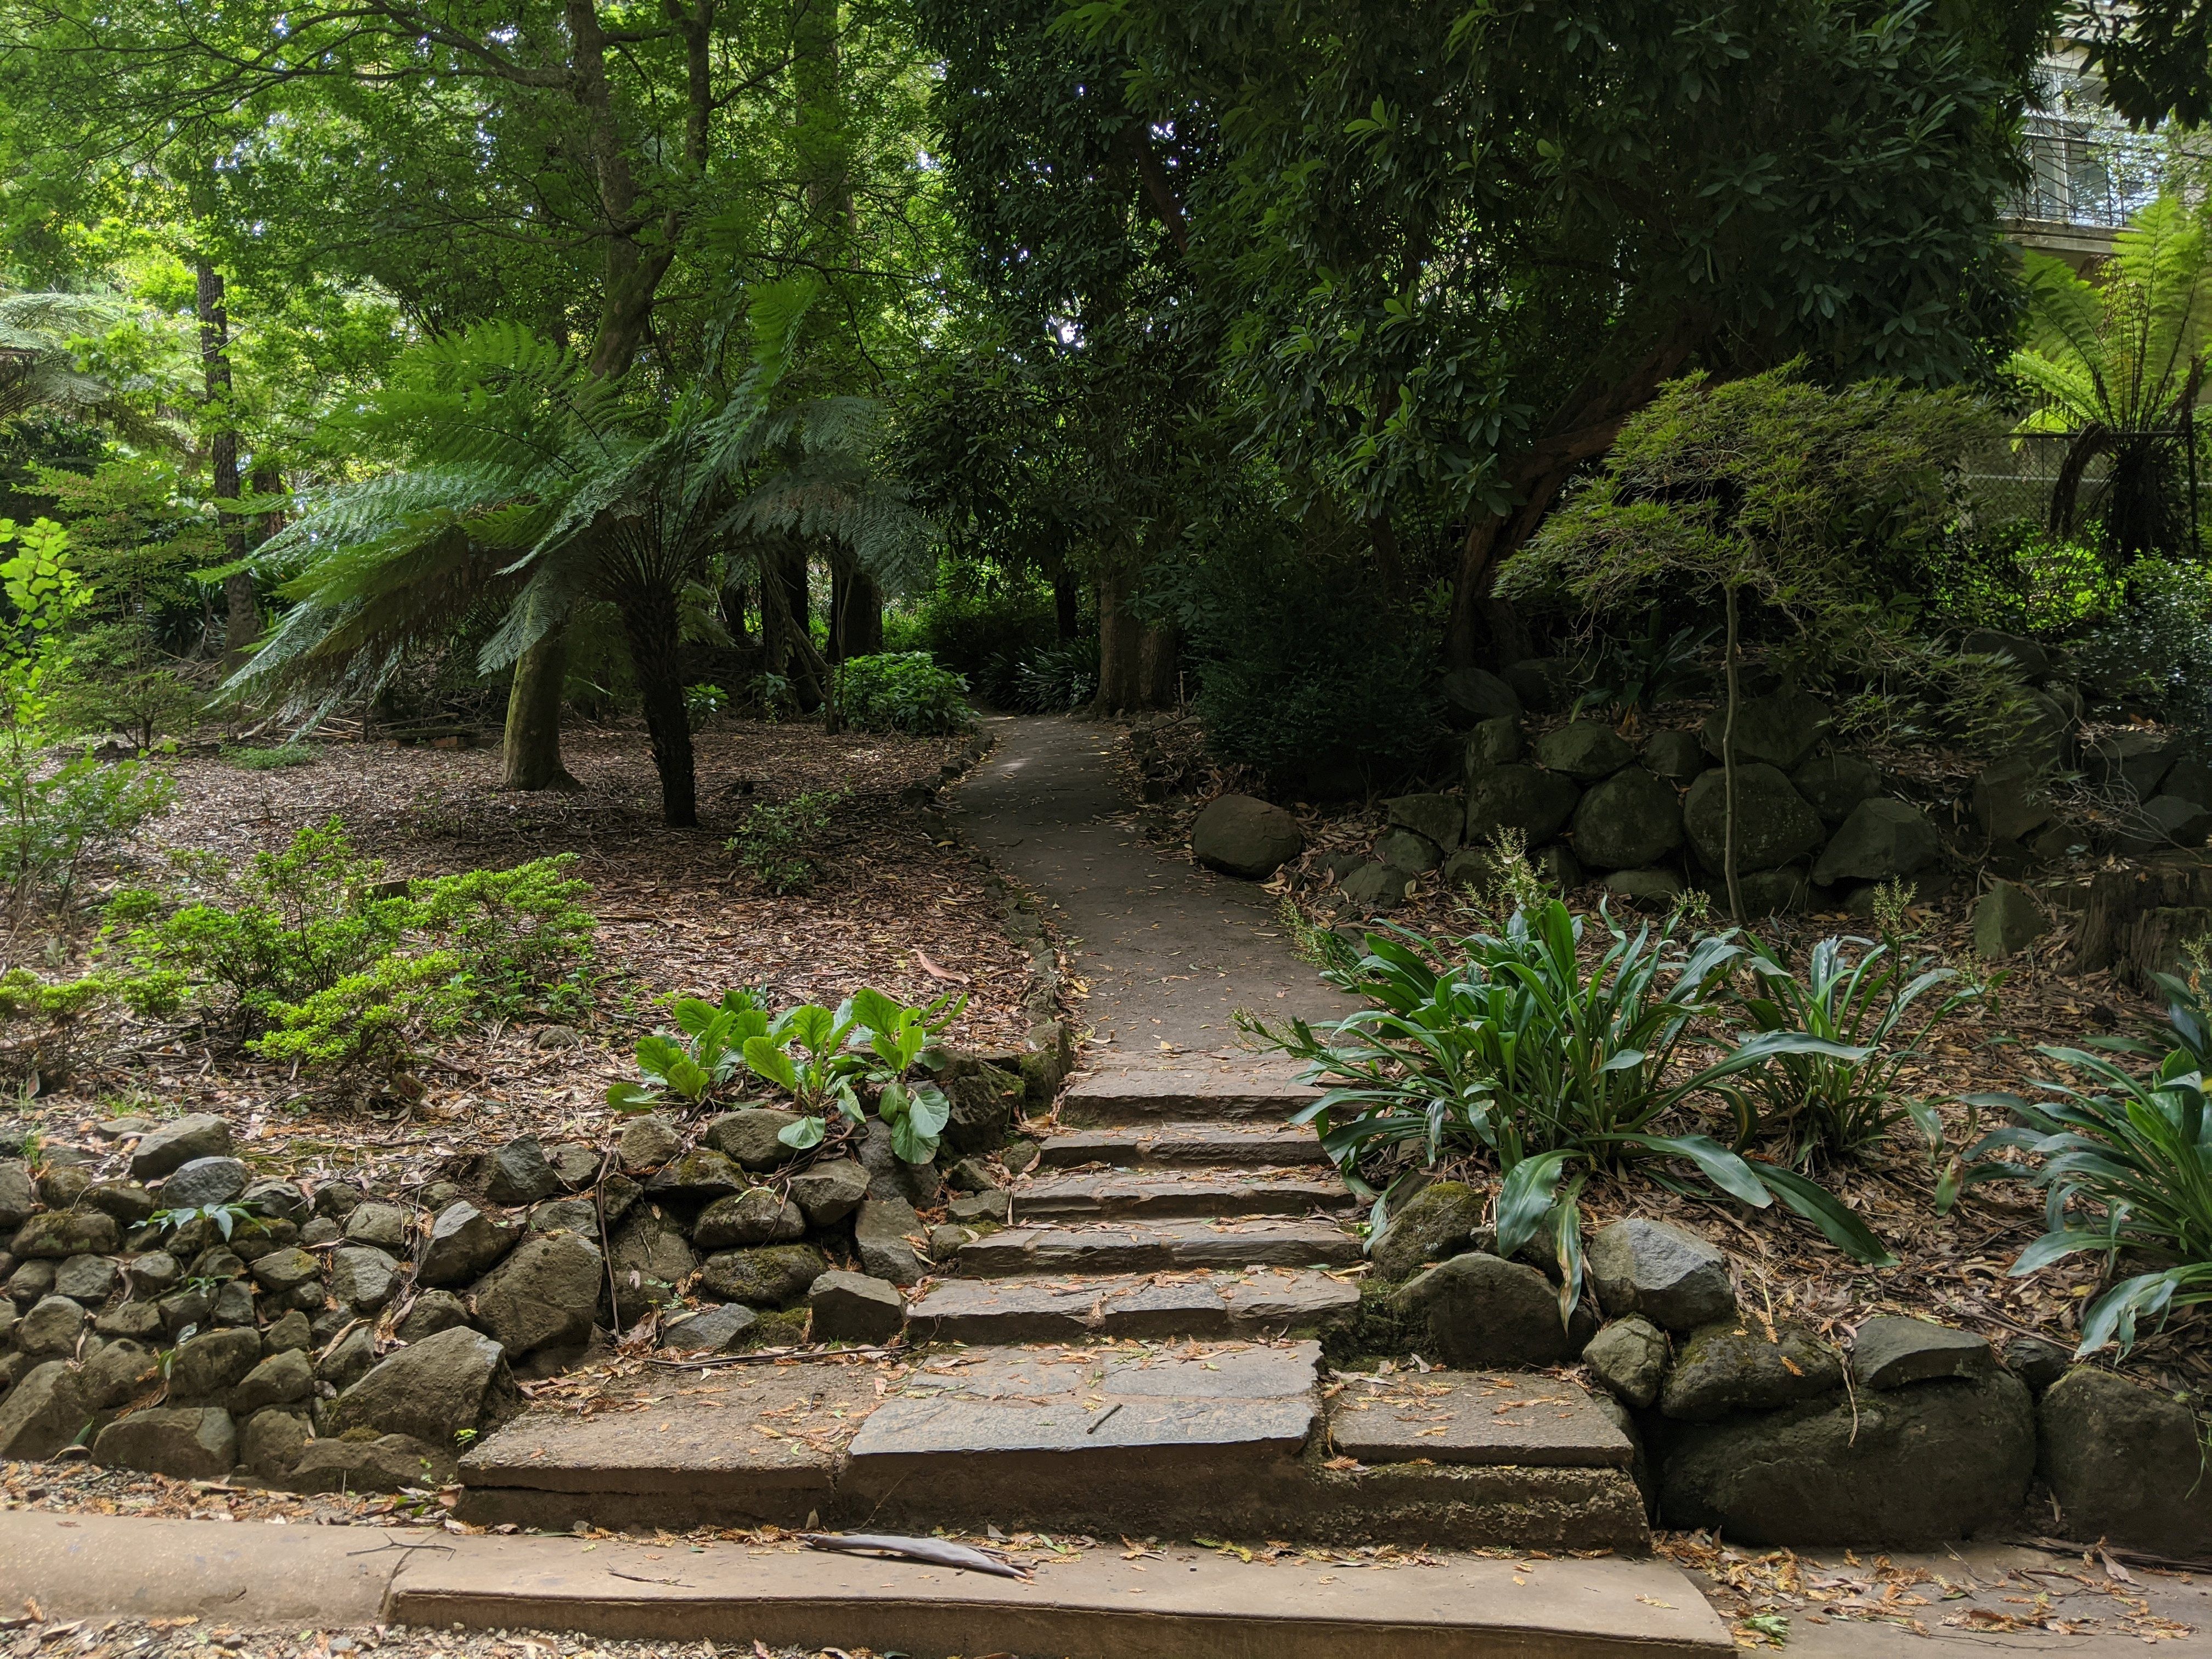 Caption: A pathway leading deeper in the garden